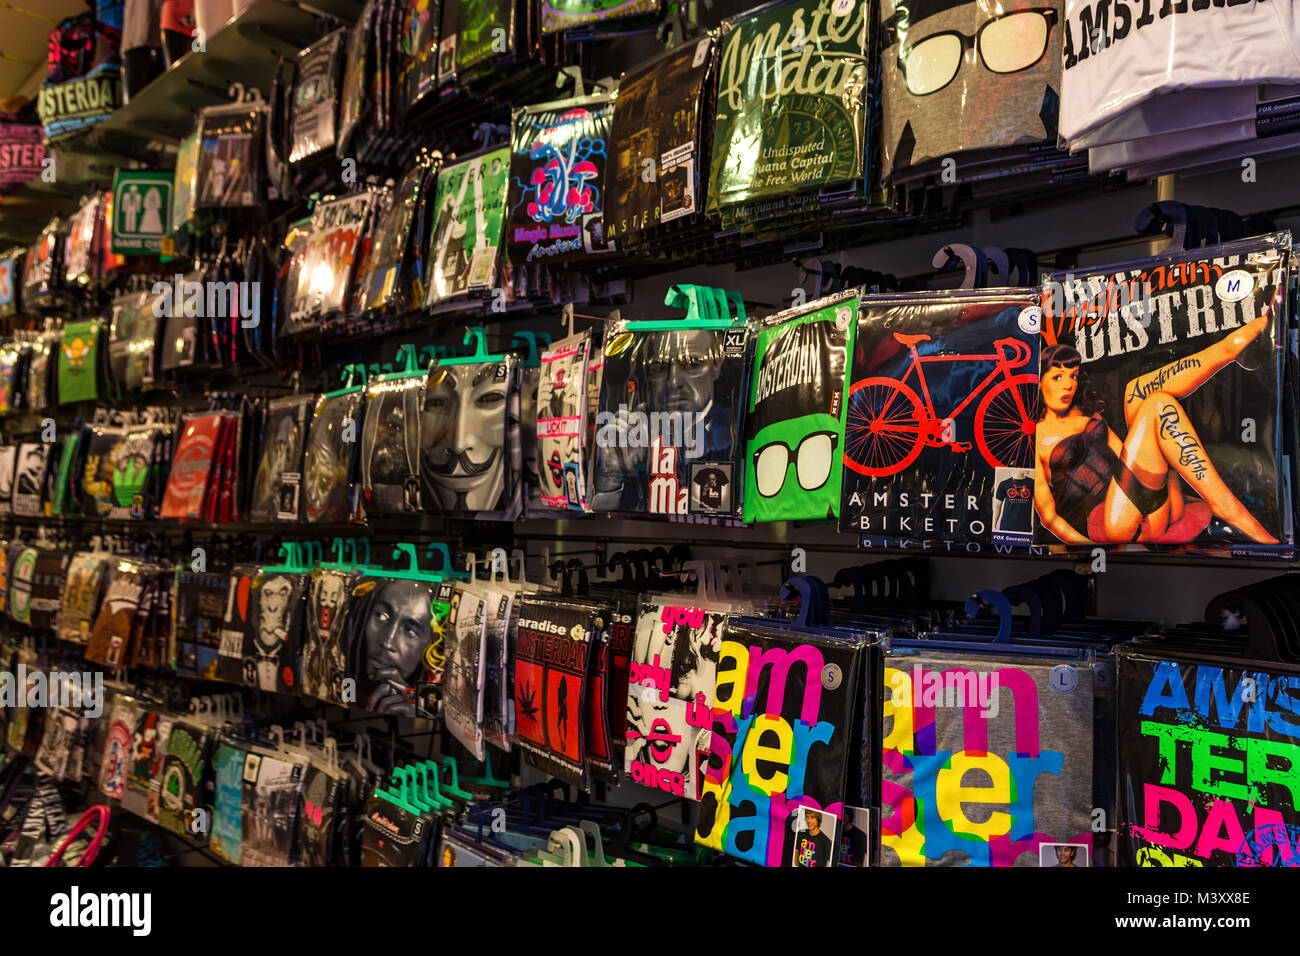 AMSTERDAM, THE NETHERLANDS - JUNE 10, 2014: Souvenir T-shirts in shop in  Amsterdam Stock Photo - Alamy